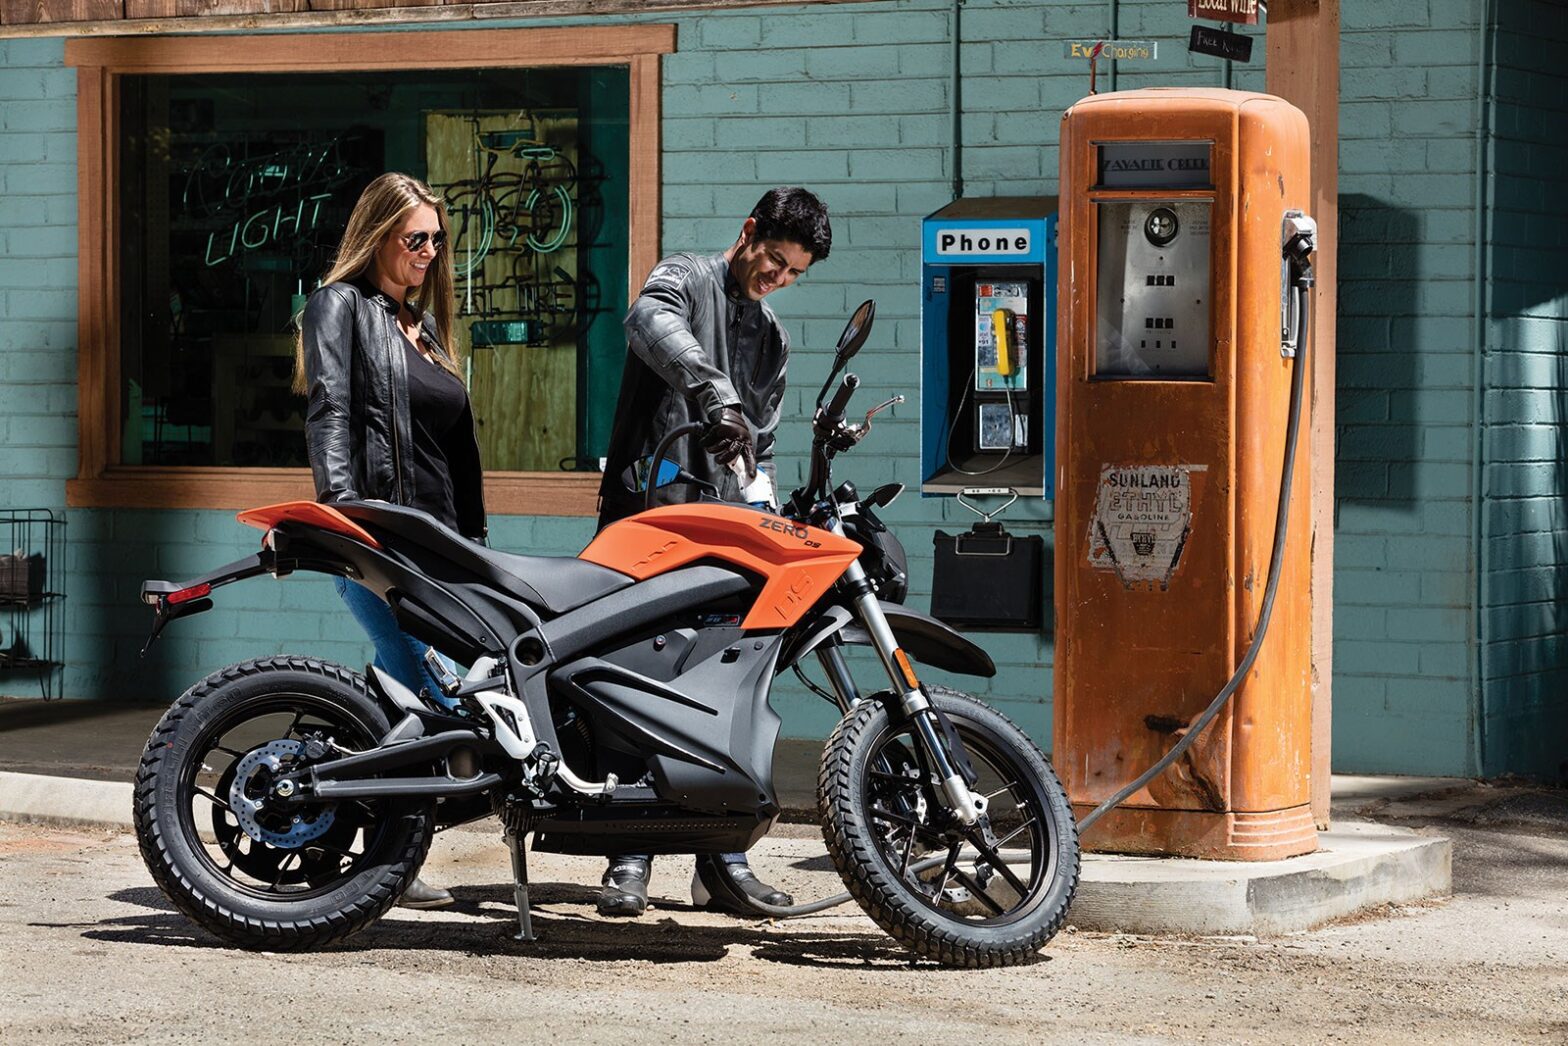 Electric Motorbike Insurance With MCN Compare